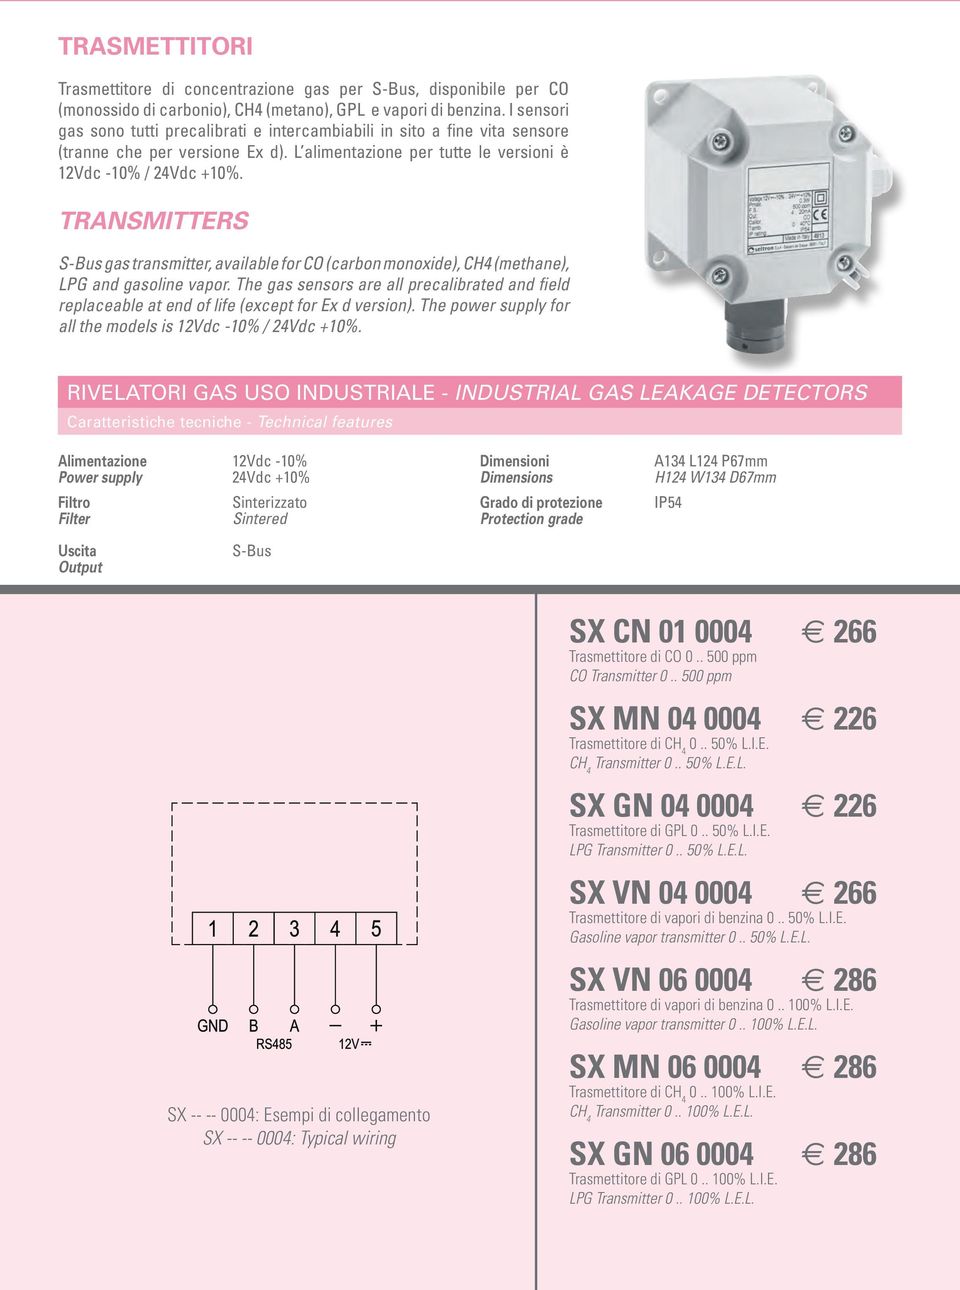 TRANSMITTERS S-Bus gas transmitter, available for CO (carbon monoxide), CH4 (methane), LPG and gasoline vapor.